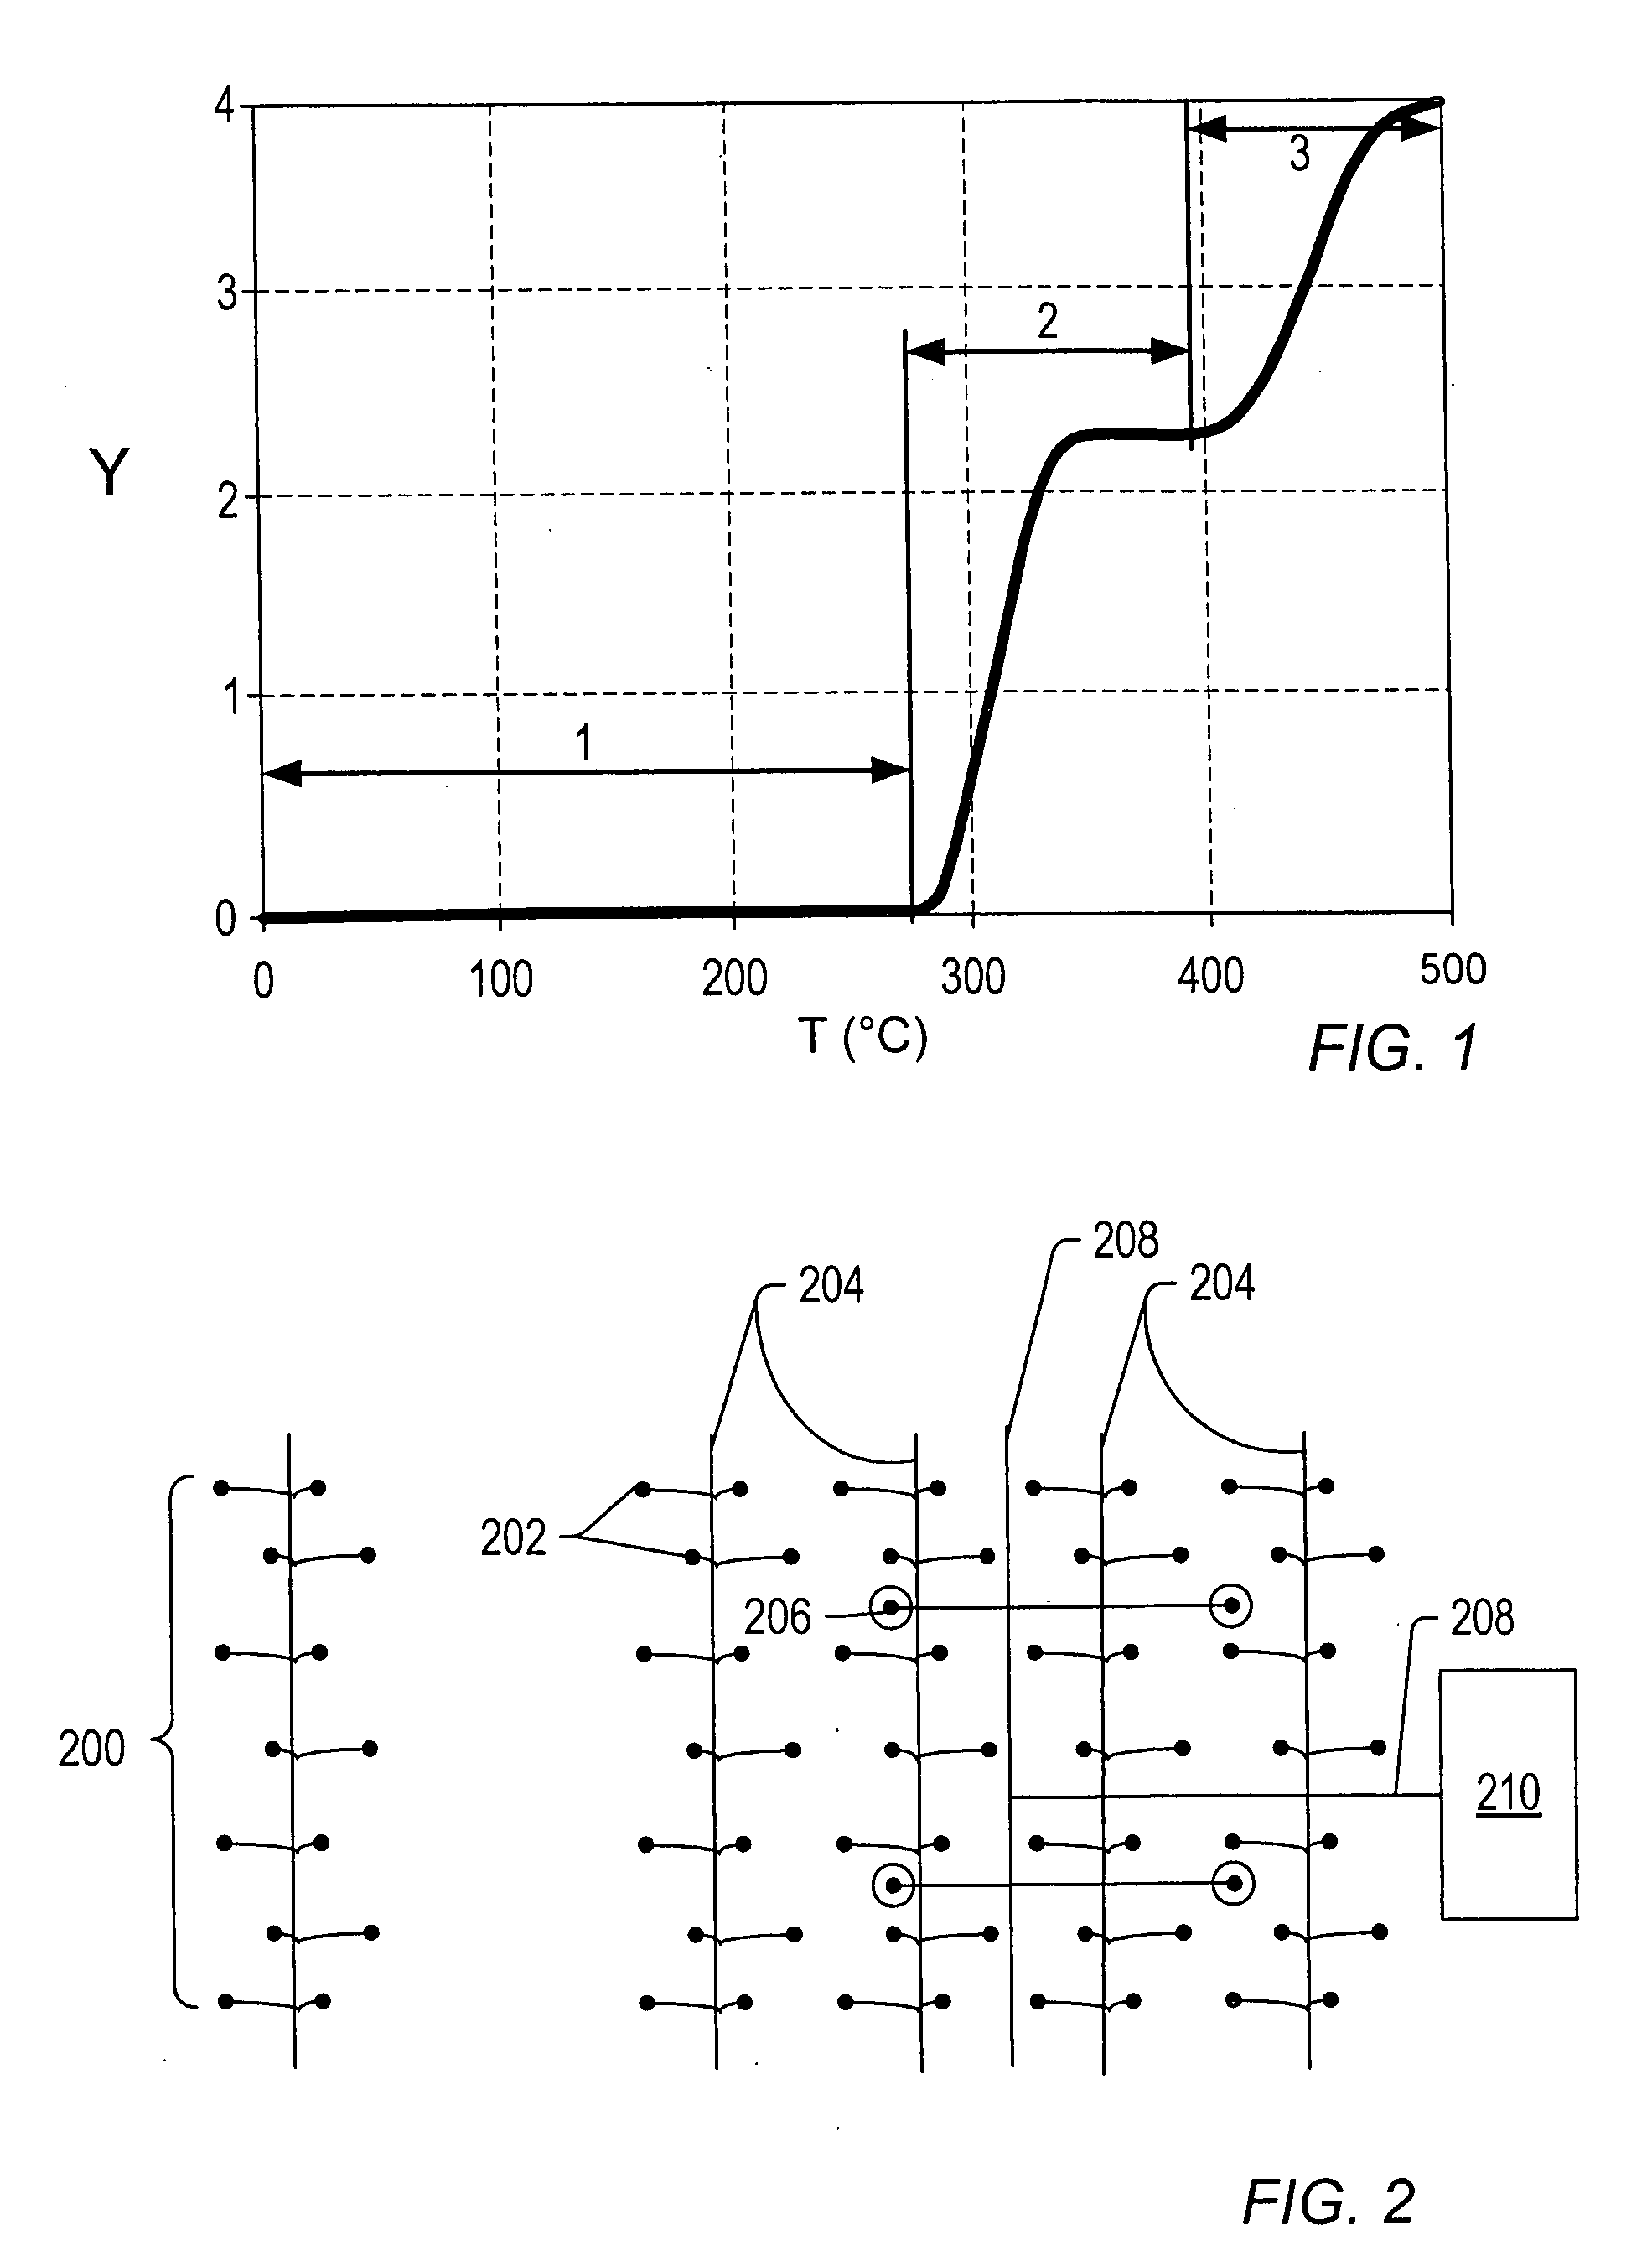 Compositions produced using an in situ heat treatment process